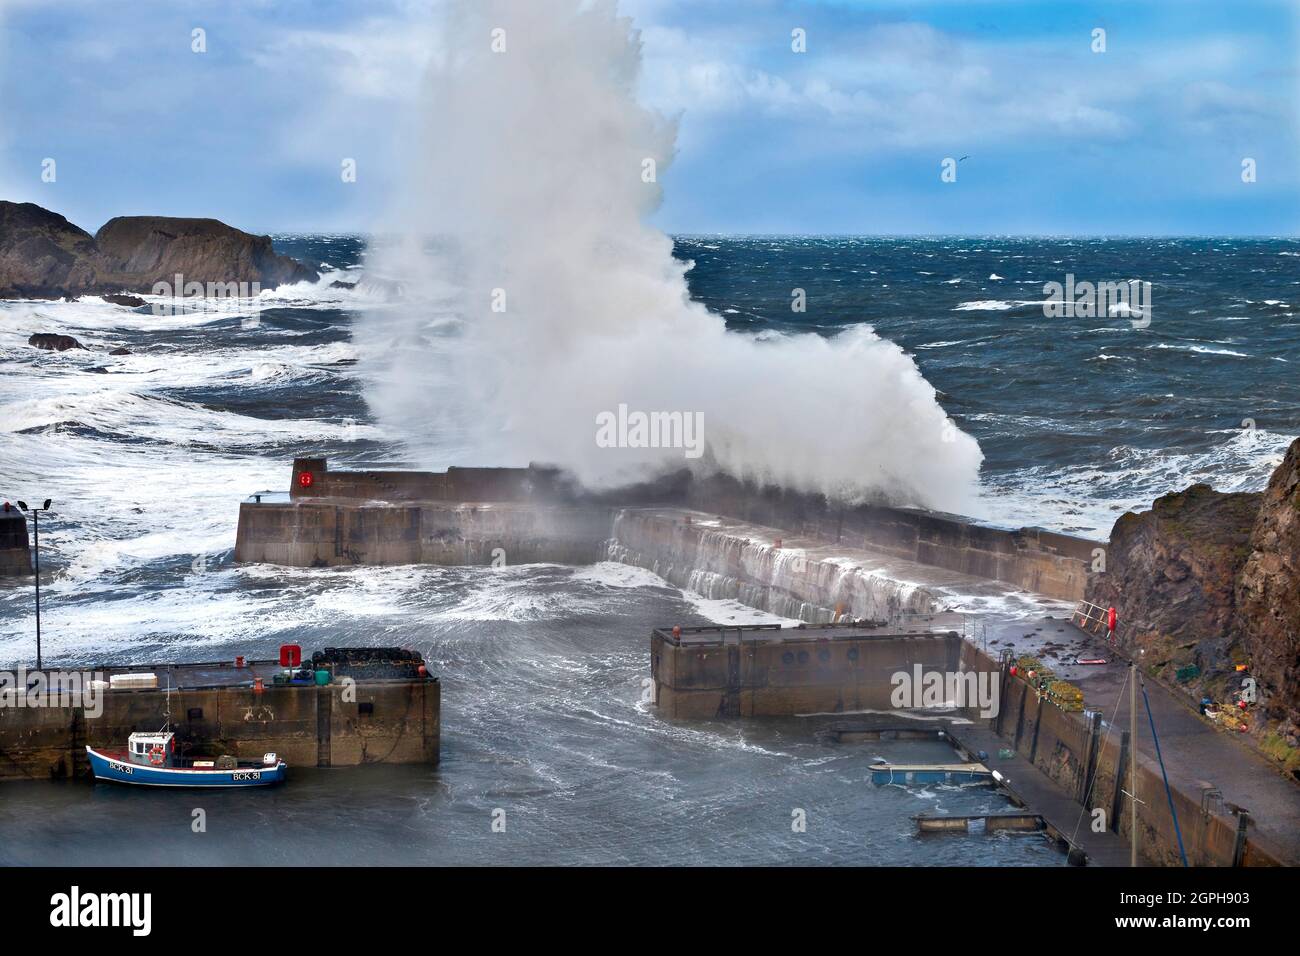 PORTKNOCKIE MORAY COAST SCOTLAND A WINTER STORM WITH WIND DRIVEN WAVES OVER THE HARBOUR WALLS Stock Photo